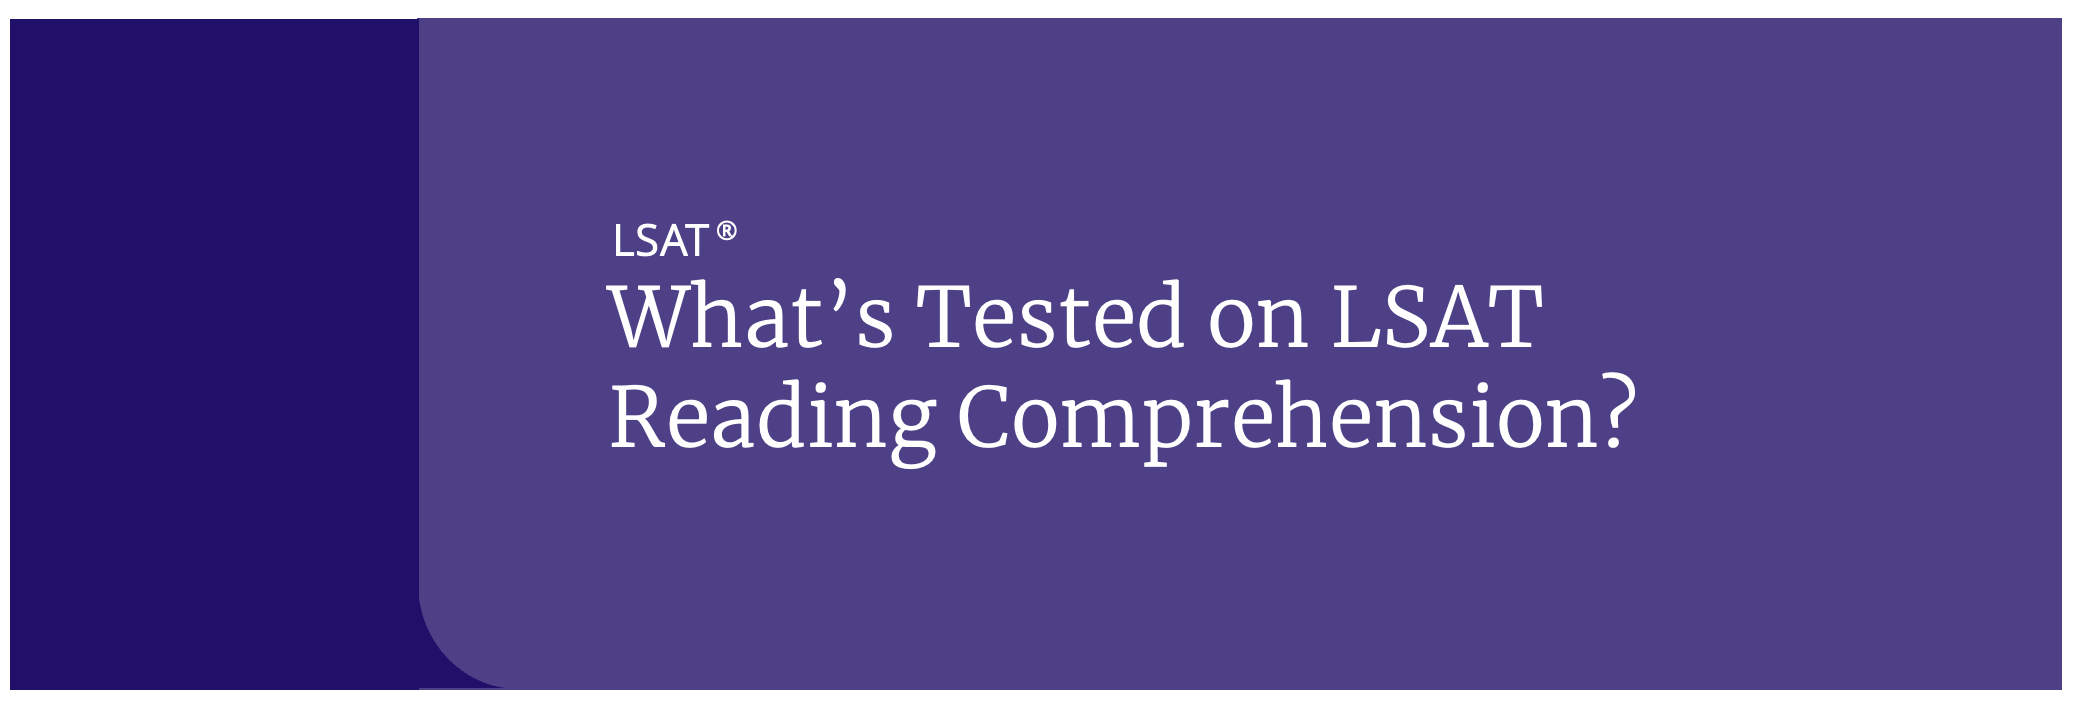 LSAT Reading Comprehension Tips, Strategies & Wrong Answers Kaplan